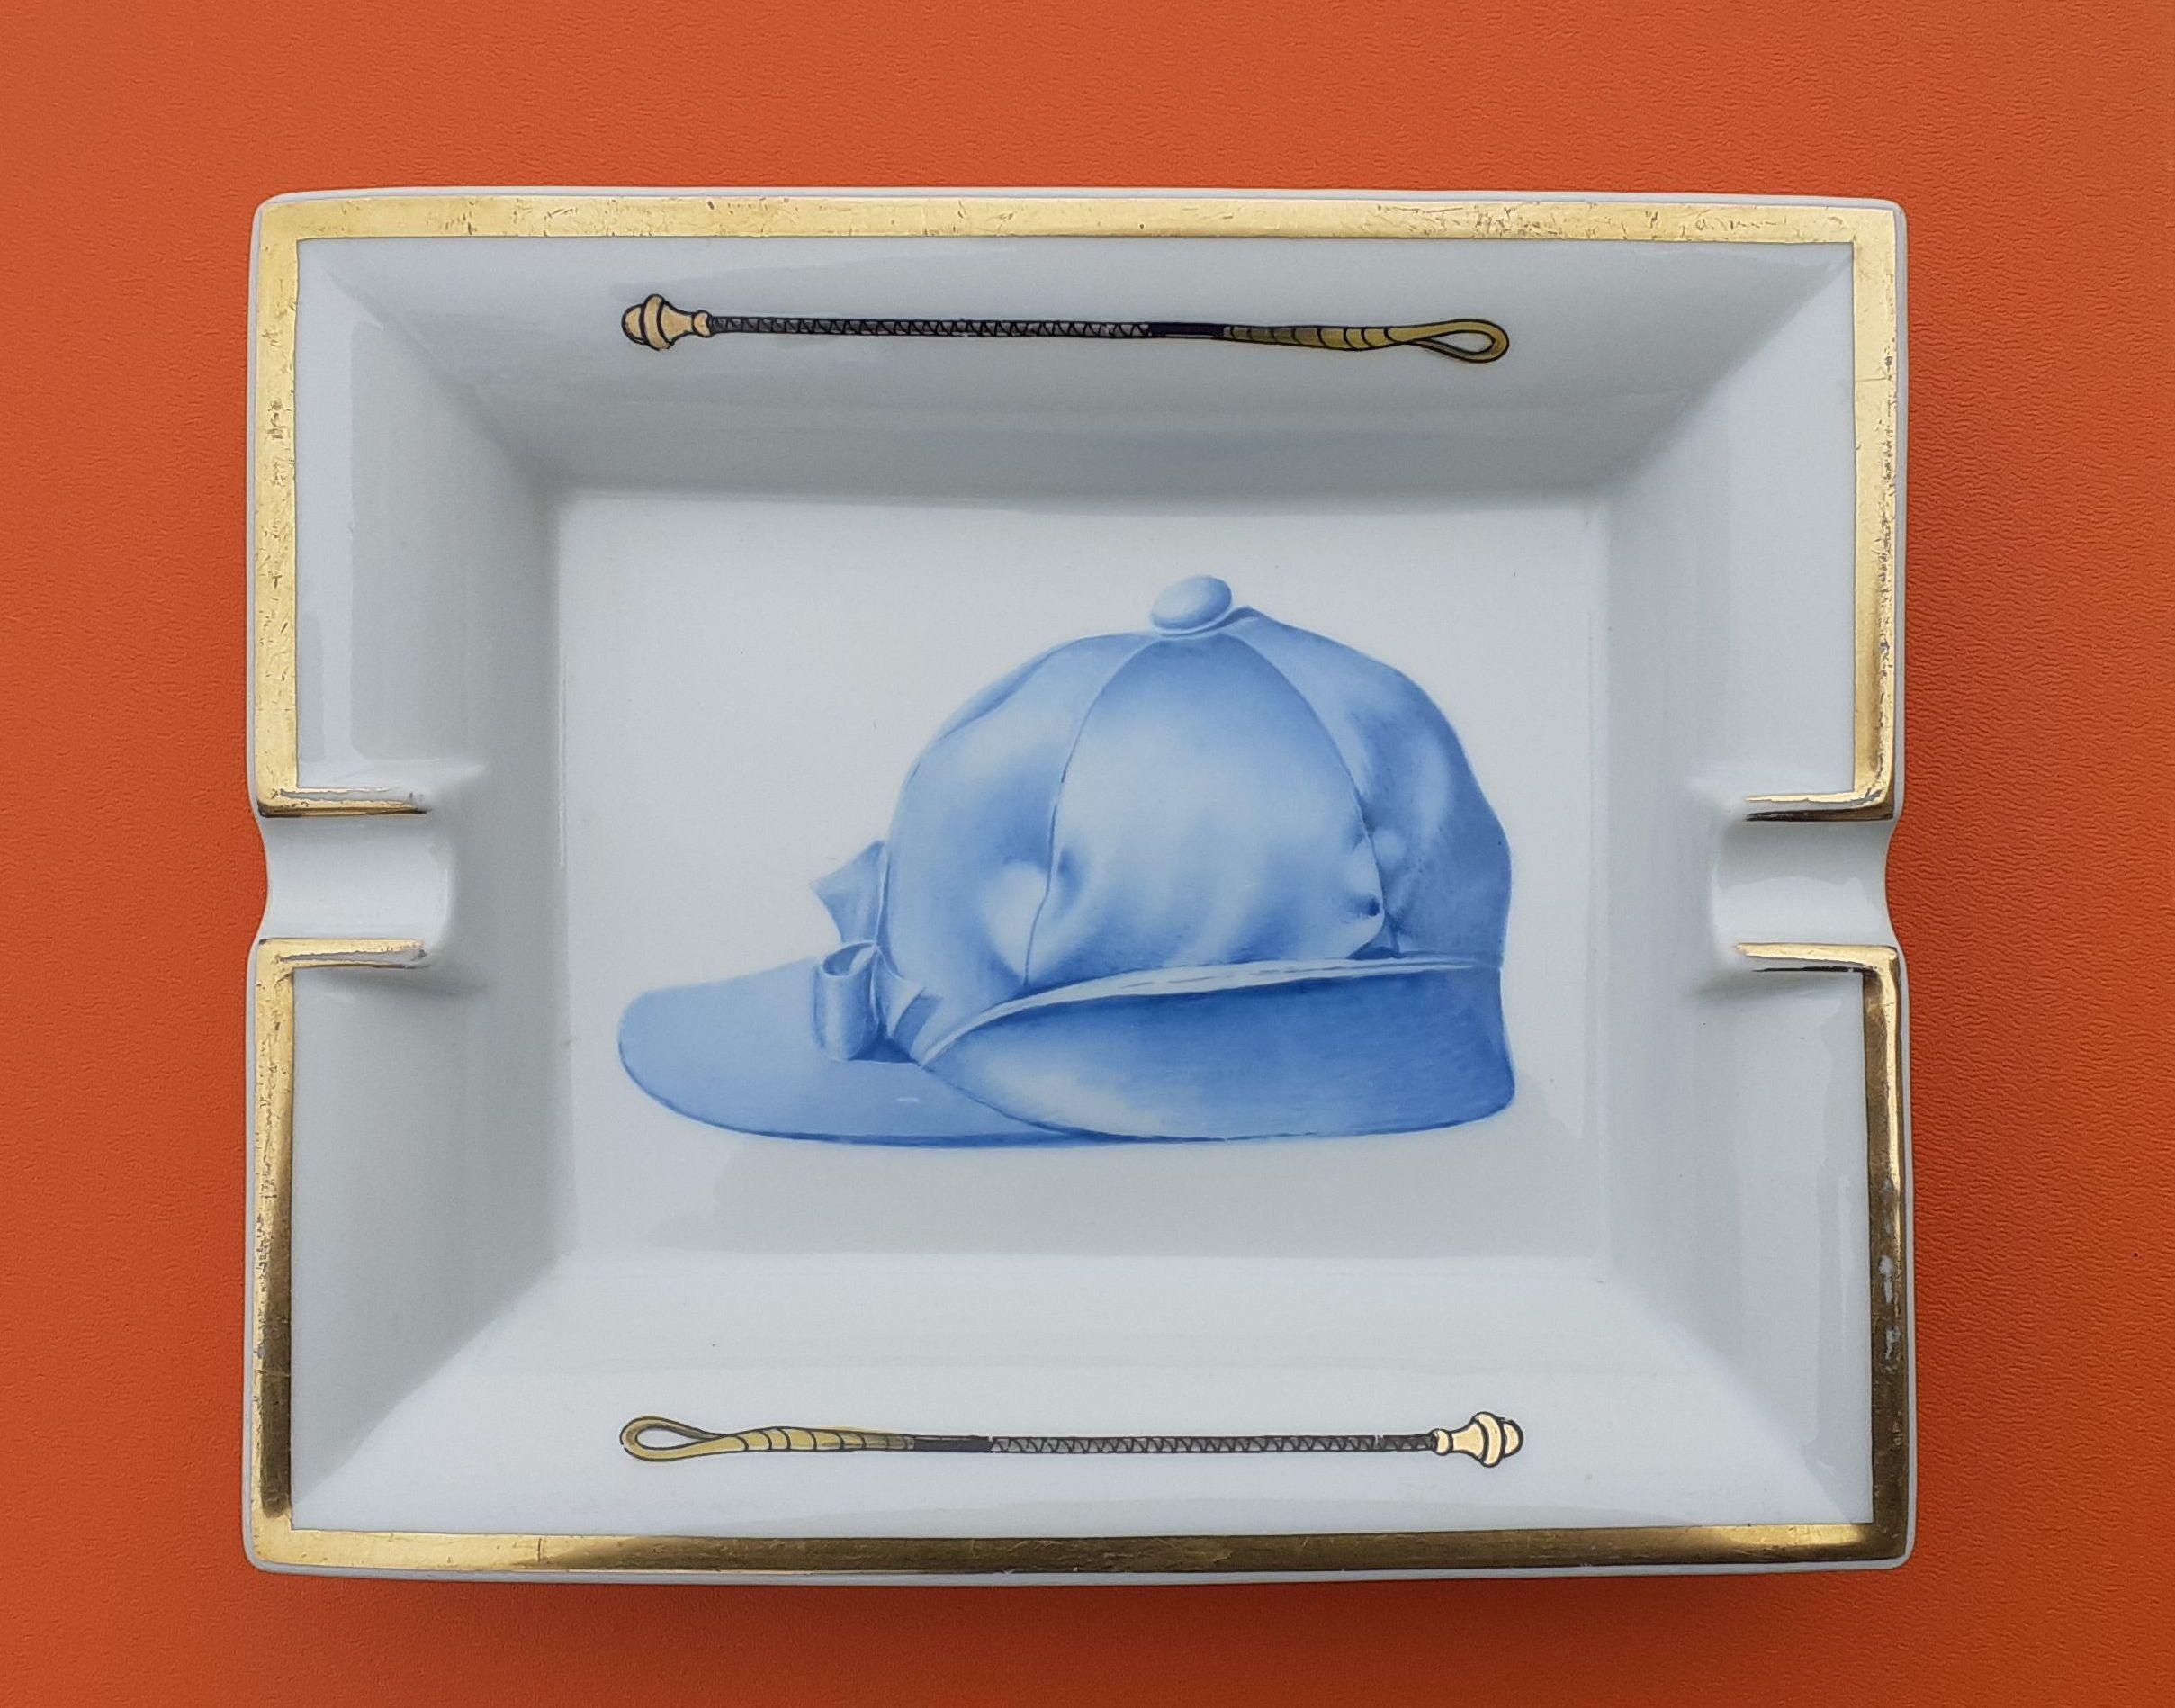 Rare and Beautiful Authentic Hermès Ashtray

Pattern: Riding helmet / Jockey cap

Made in France

Made of printed porcelain and golden edges

Bottom covered with blue-green leather

Colorways: White, Blue, Golden

